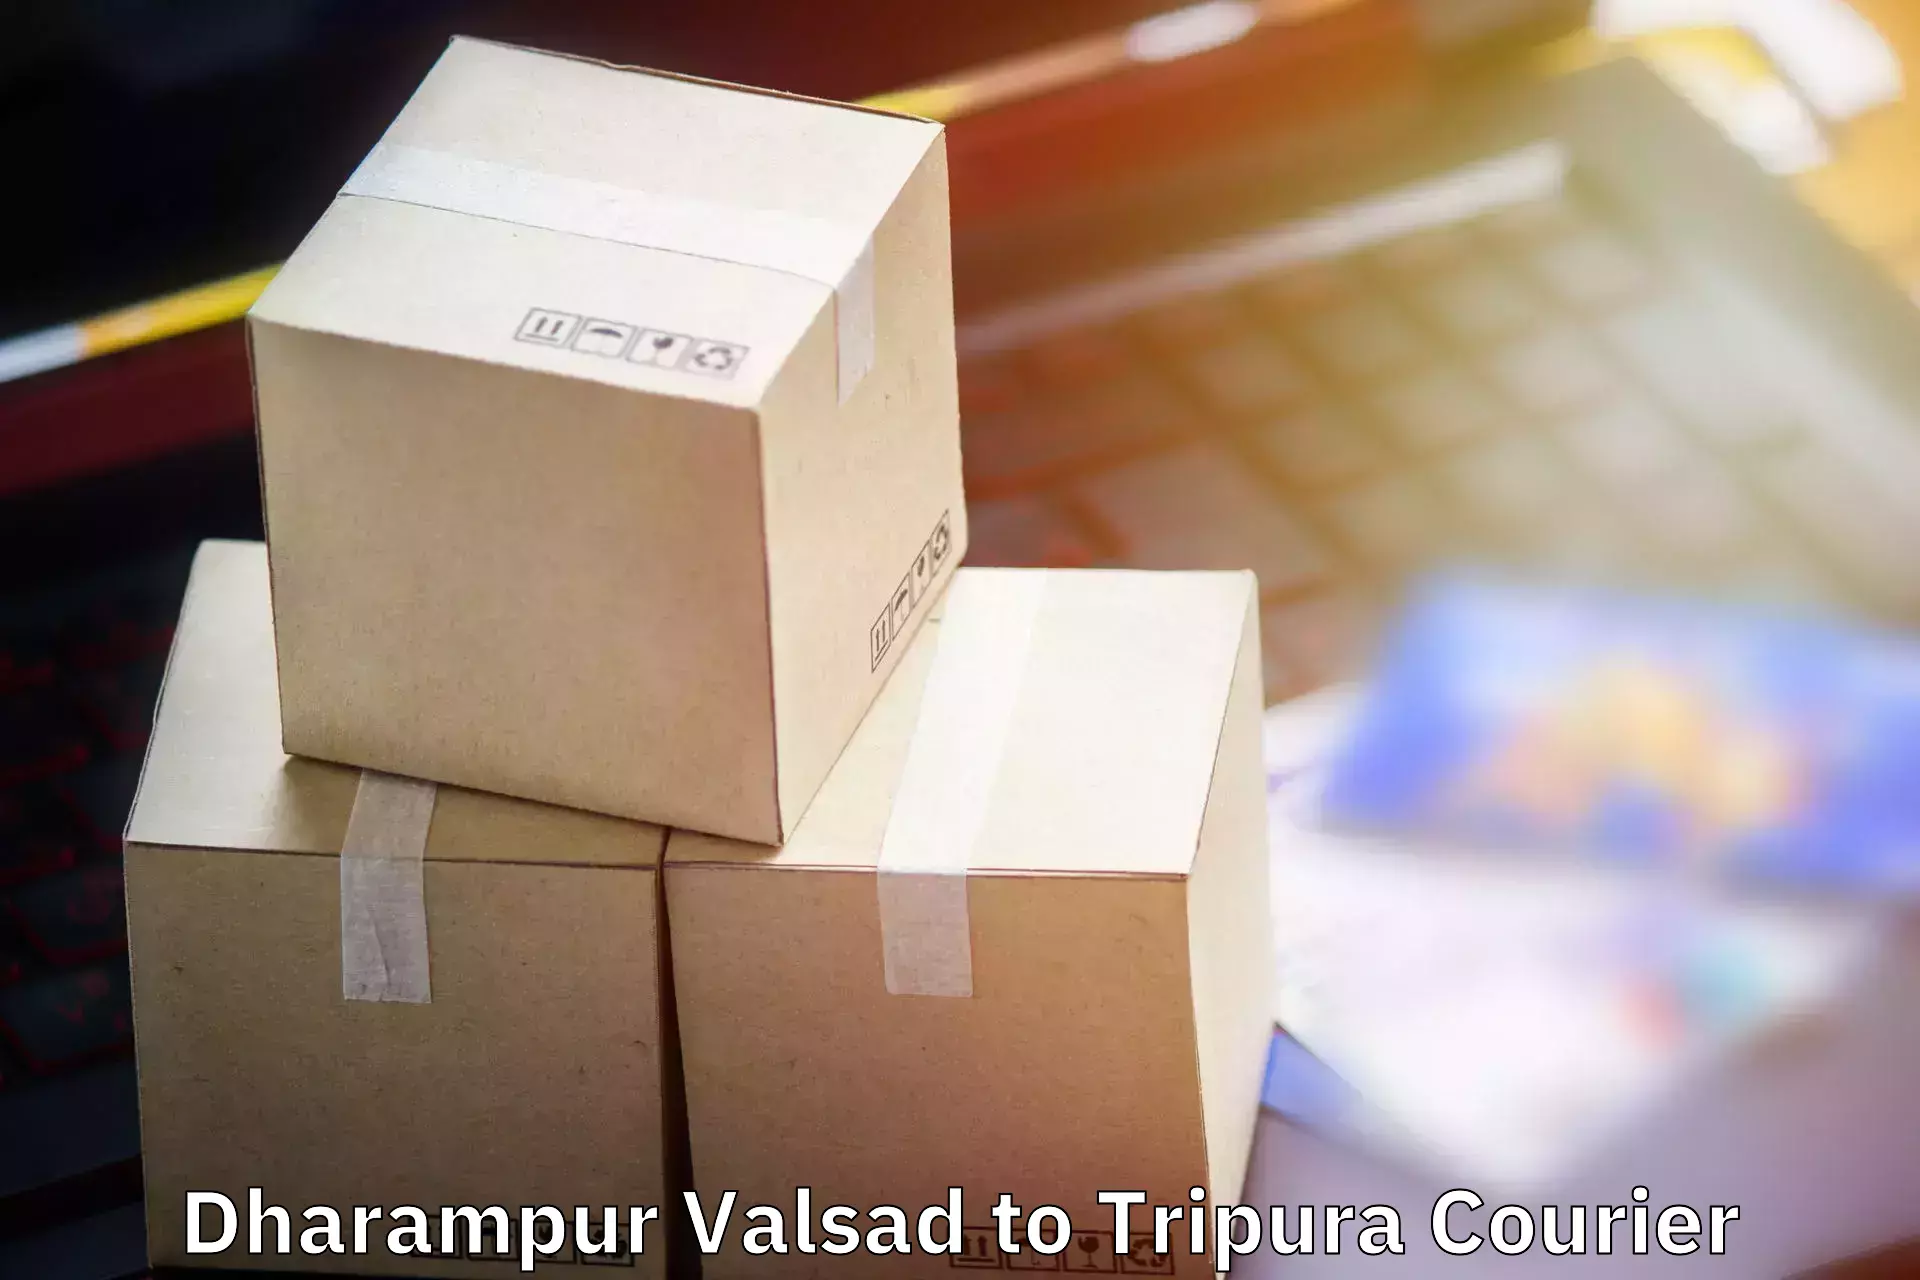 Luggage transport tips in Dharampur Valsad to Udaipur Tripura